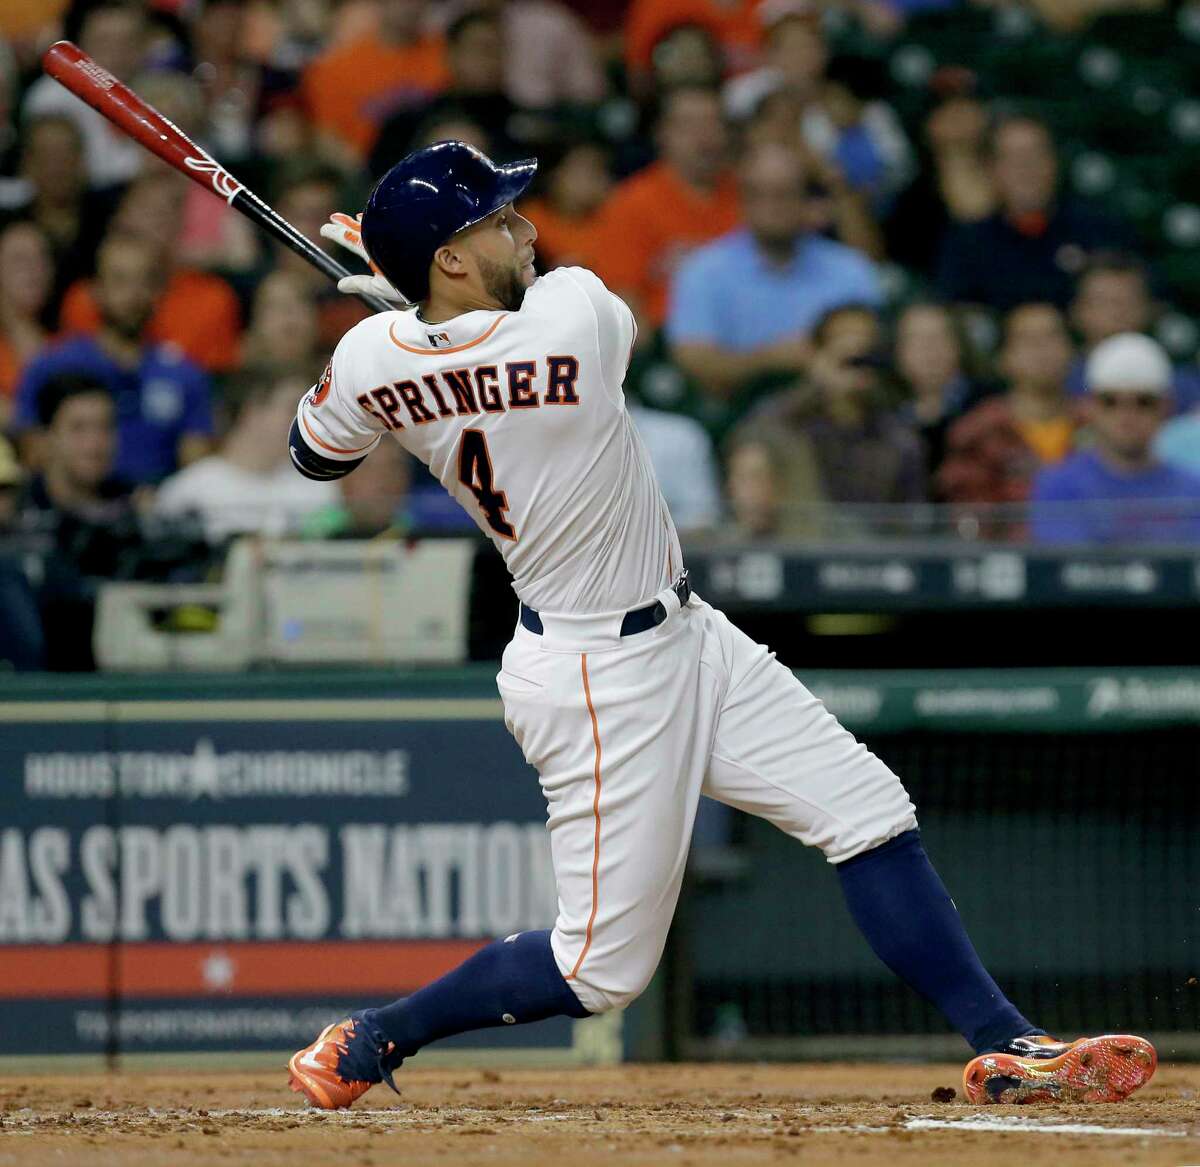 Houston Astros George Springer hits a RBI single against the Texas Rangers during the second inning at Minute Maid Park Wednesday, May 3, 2017, in Houston. Alex Bregman scored on the hit.